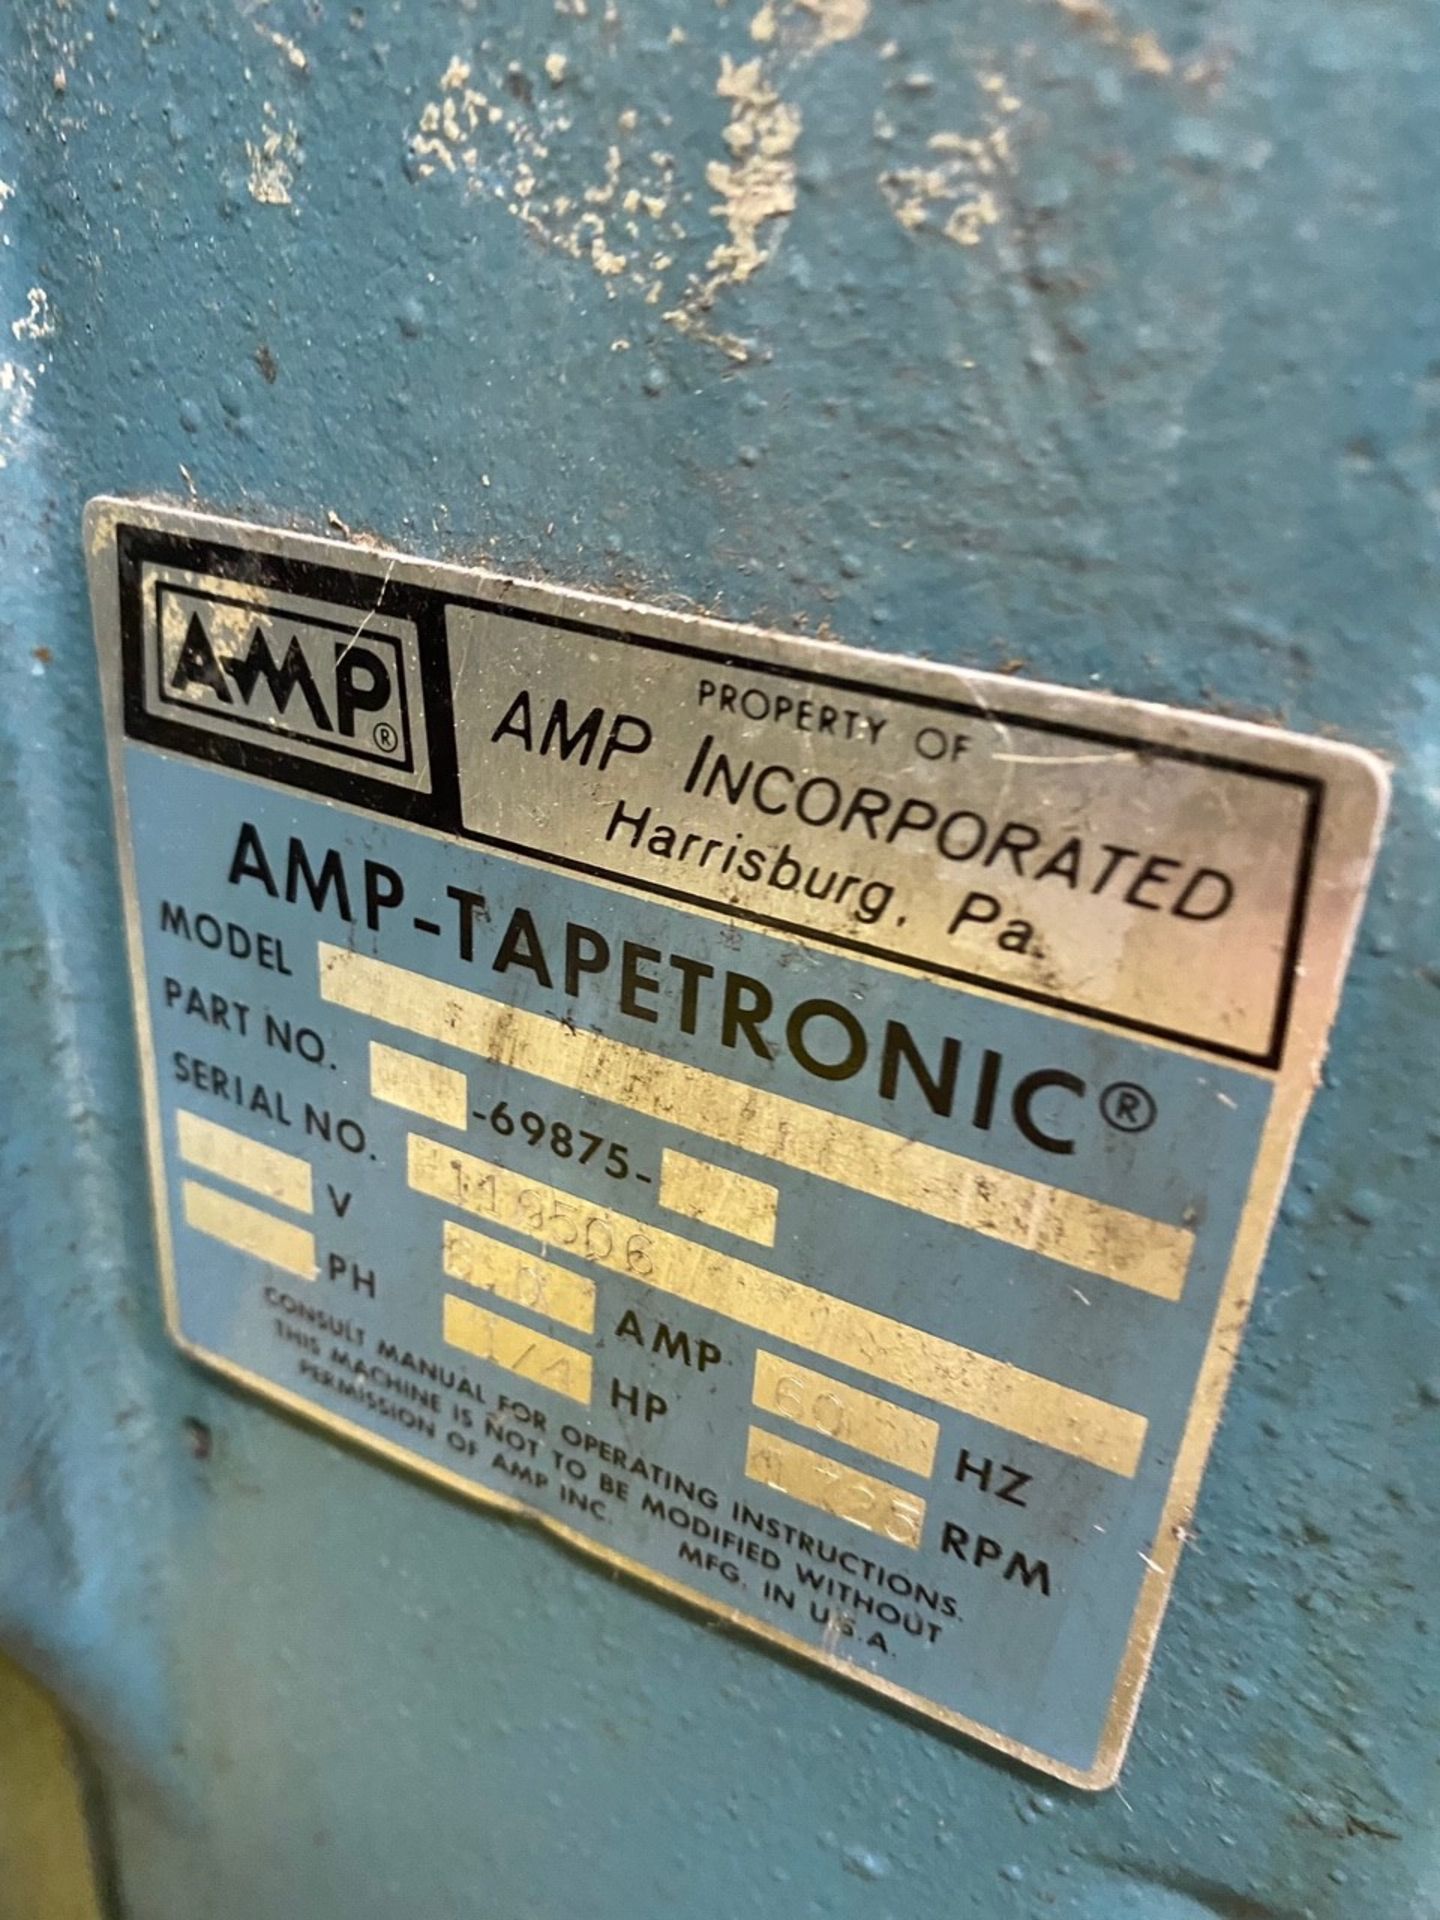 (2) AMP-TAPETRONIC ROLL FEED WIRE CRIMPER(S); MODEL: TAPERTRONIC; S# 30019 & 116506 (6801 INDUSTRIAL - Image 2 of 2